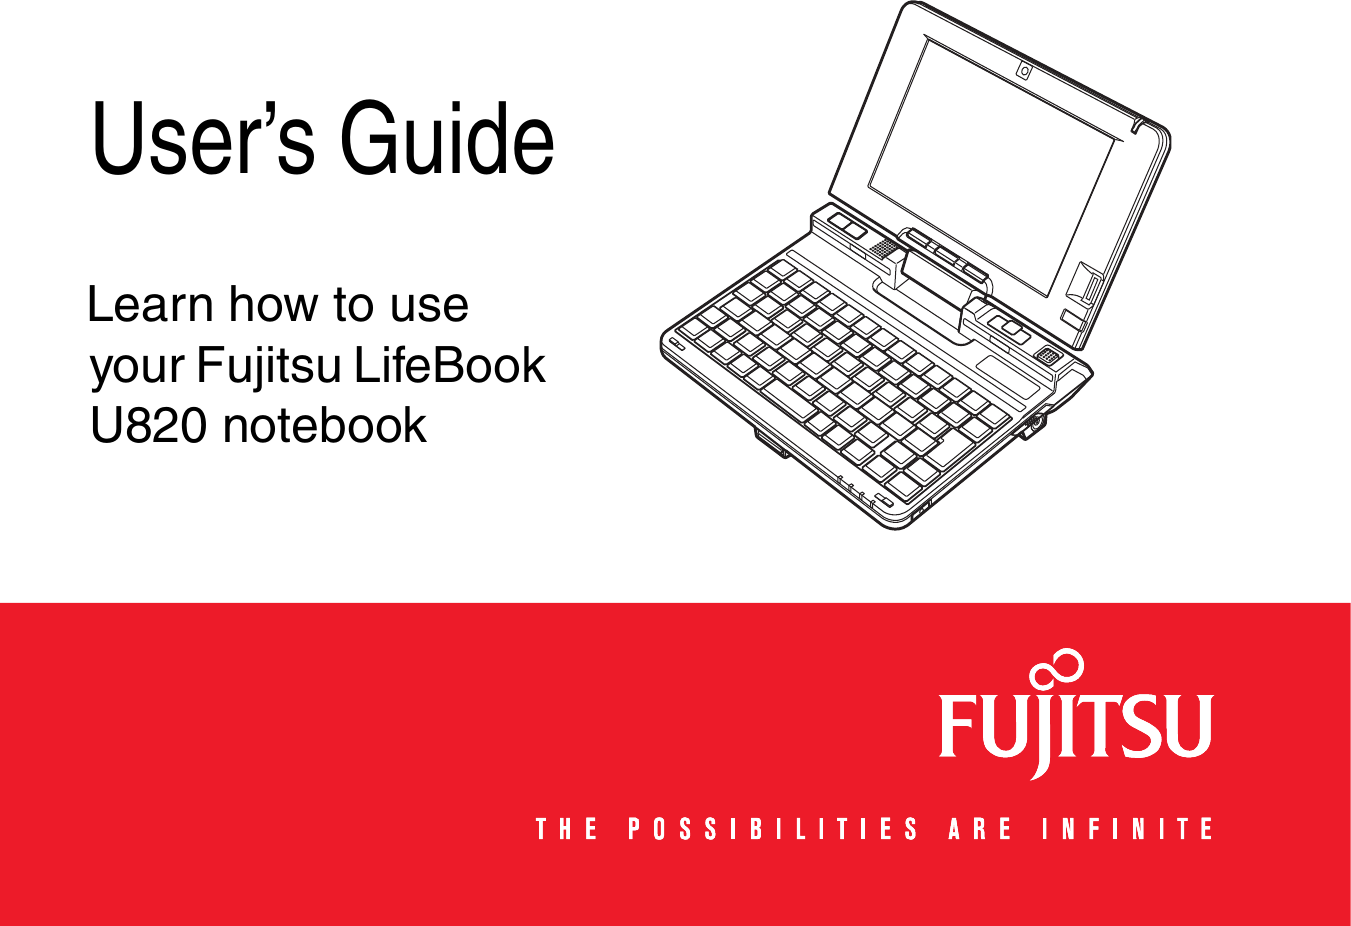   User’s GuideLearn how to use your Fujitsu LifeBook U820 notebook